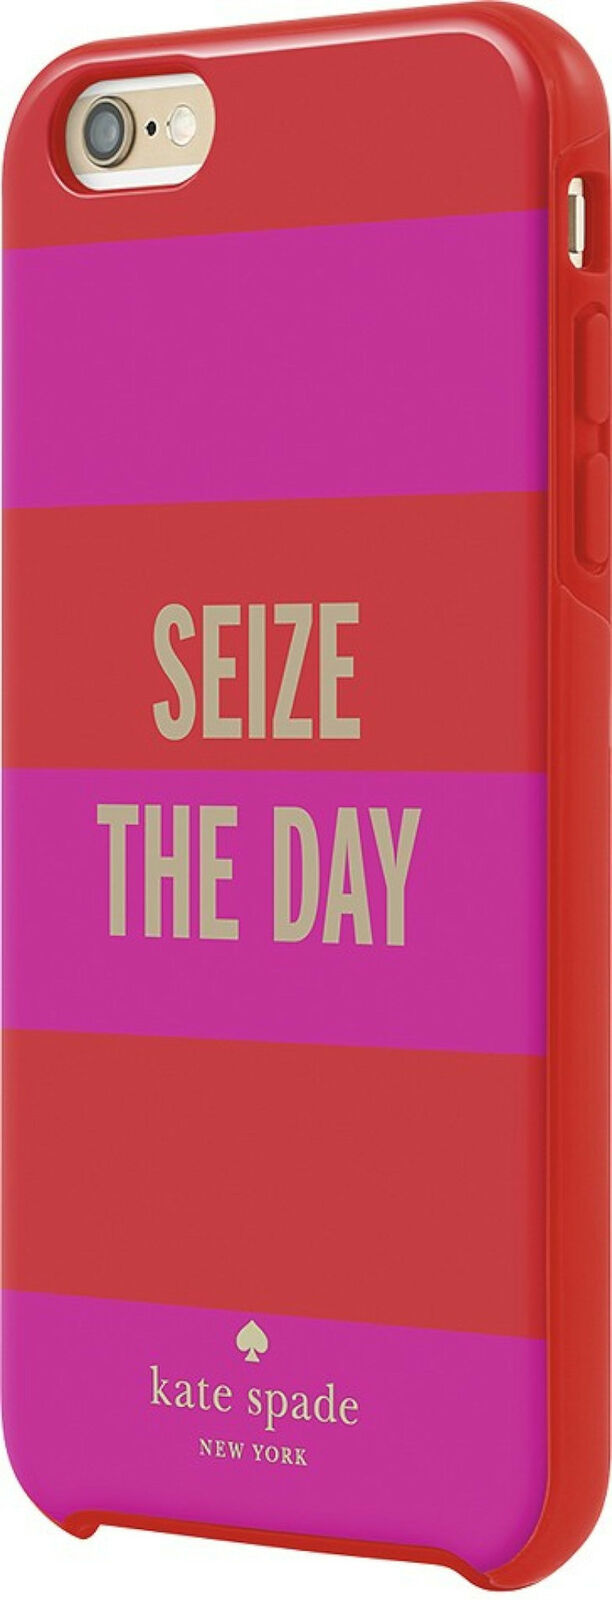 Primary image for NEW Kate Spade Hybrid Hard Shell Case Cover for iPhone 6+/6s PLUS Seize the Day